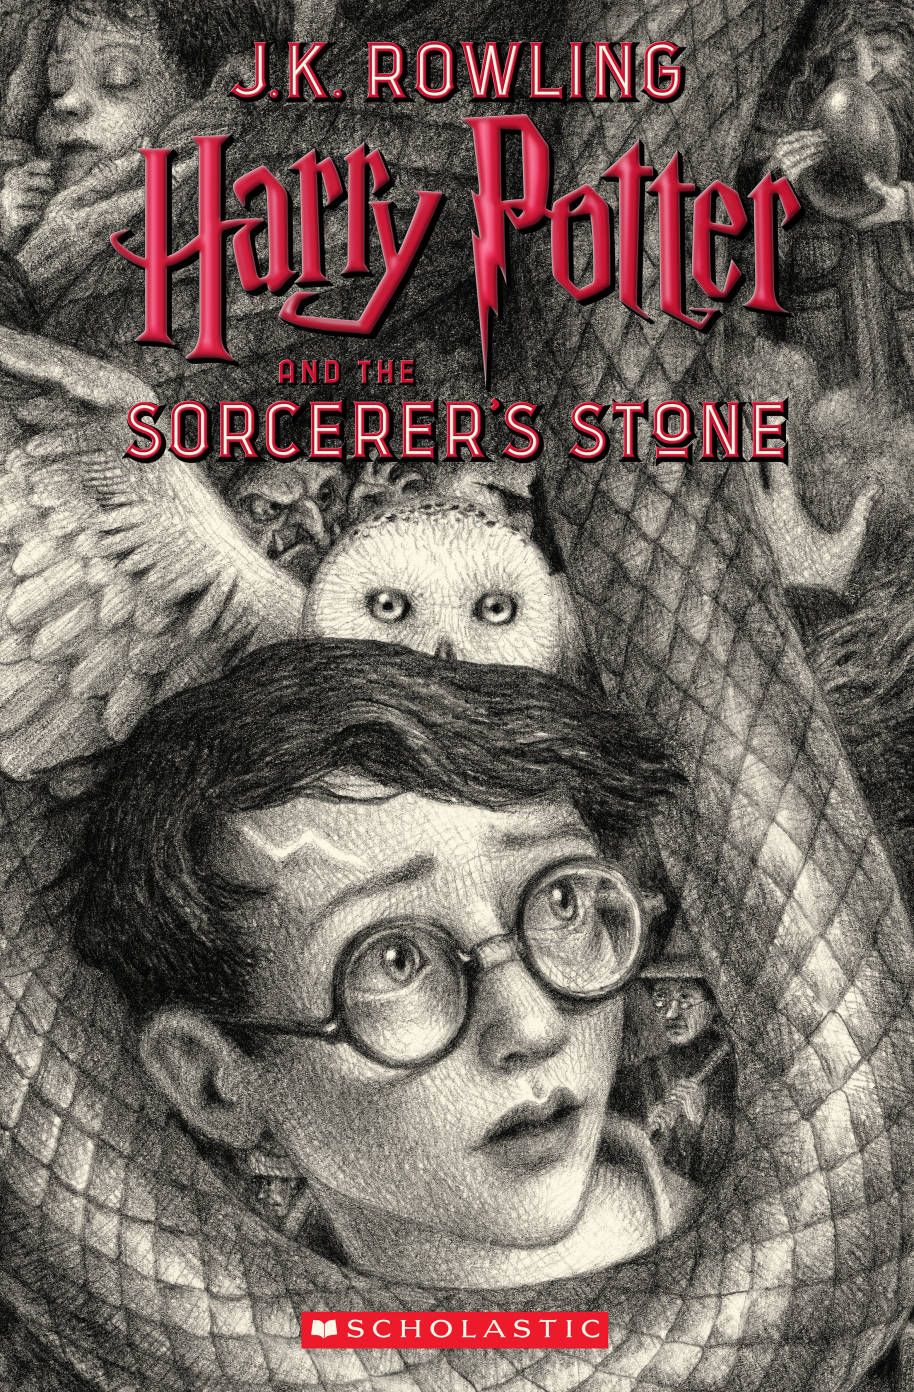 Brian Selznick's cover for Harry Potter and the Sorceror's Stone